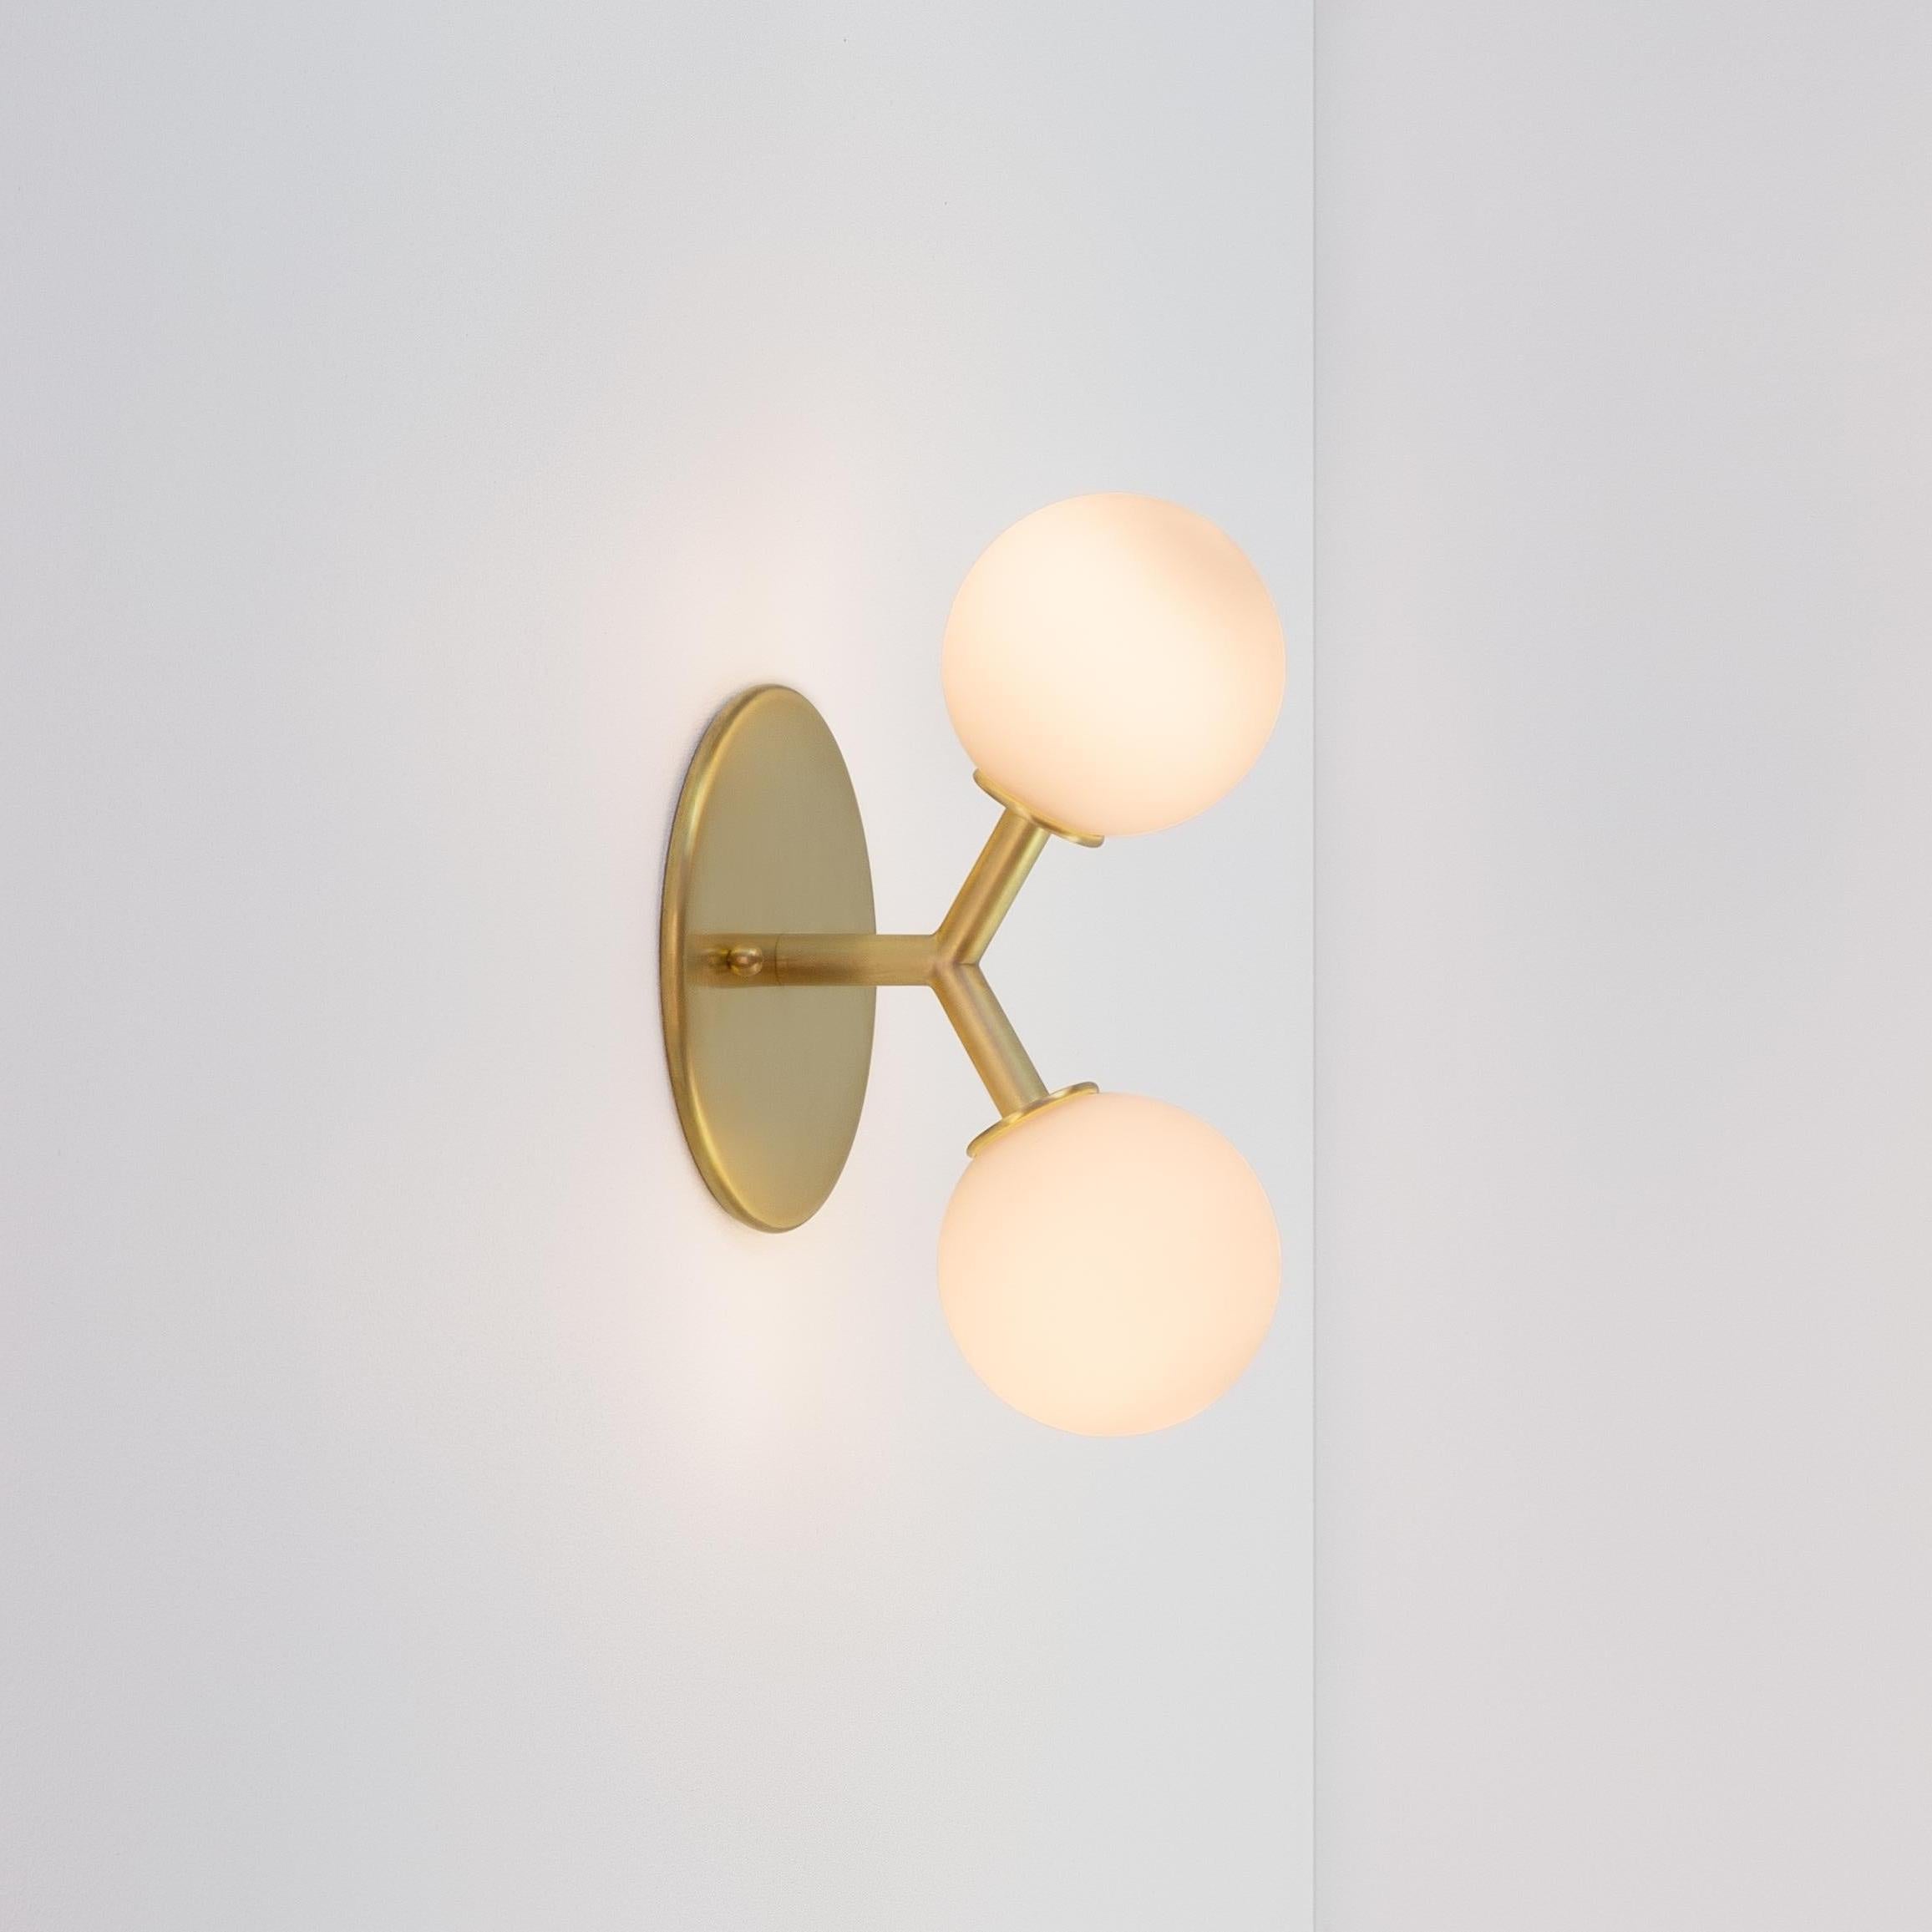 This listing is for 2x Y Sconce in Brass designed and manufactured by Research Lighting.

Lead Time: ~8 Weeks
Materials: Brass & Glass
Finish: Raw Brushed Brass 
Electronics (per fixture): 2x G9 Sockets, 2x 2.5 Watt LED Bulbs (included), 500